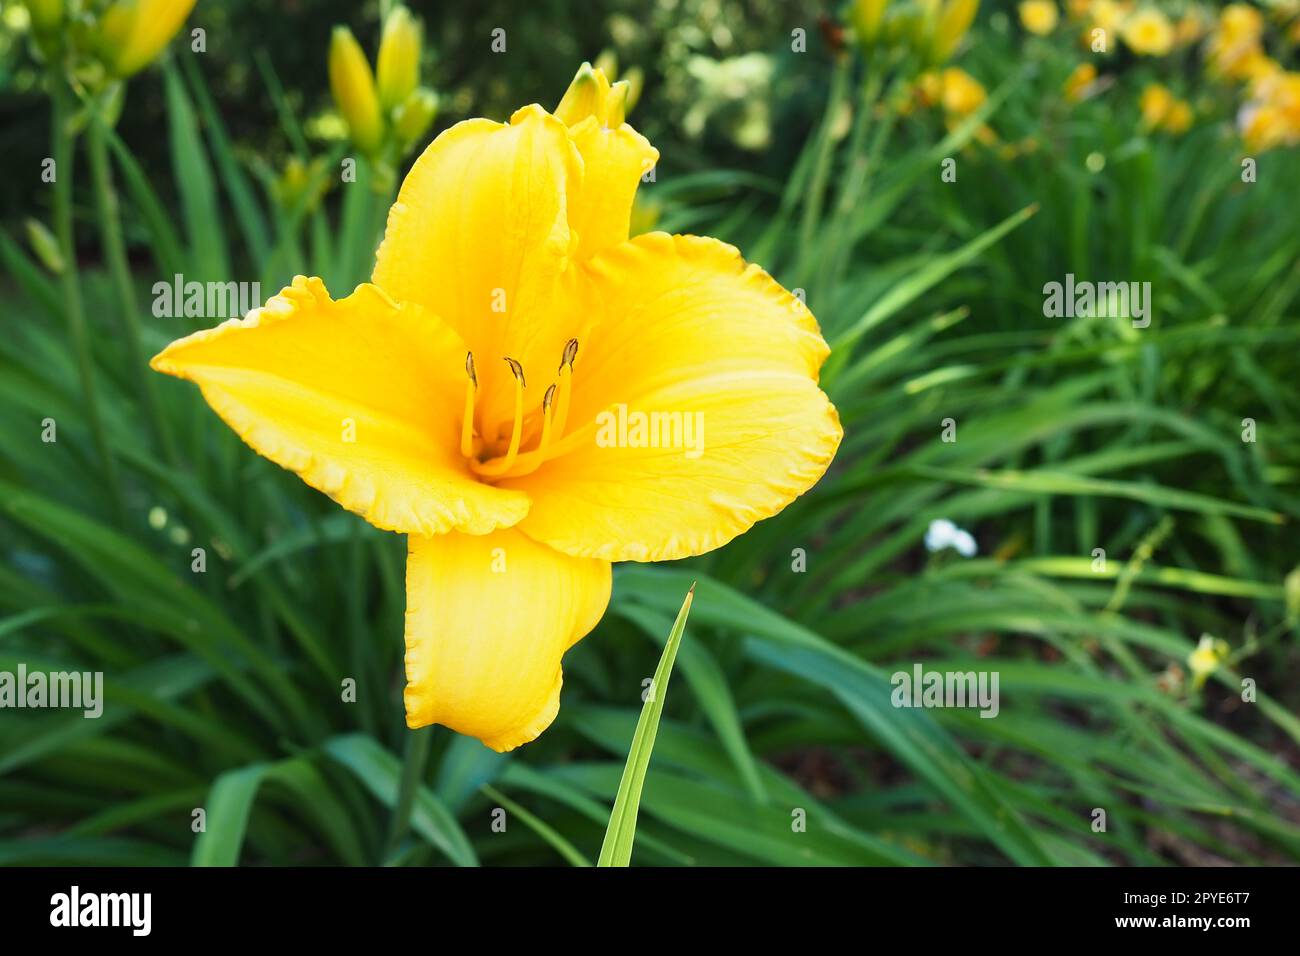 Daylily, or beautiful lemon-yellow, is a beautifully flowering perennial herbaceous plant. Long thin green leaves. Flowering as a hobby. Hemerocallis lilioasphodelus yellow variety. Stock Photo